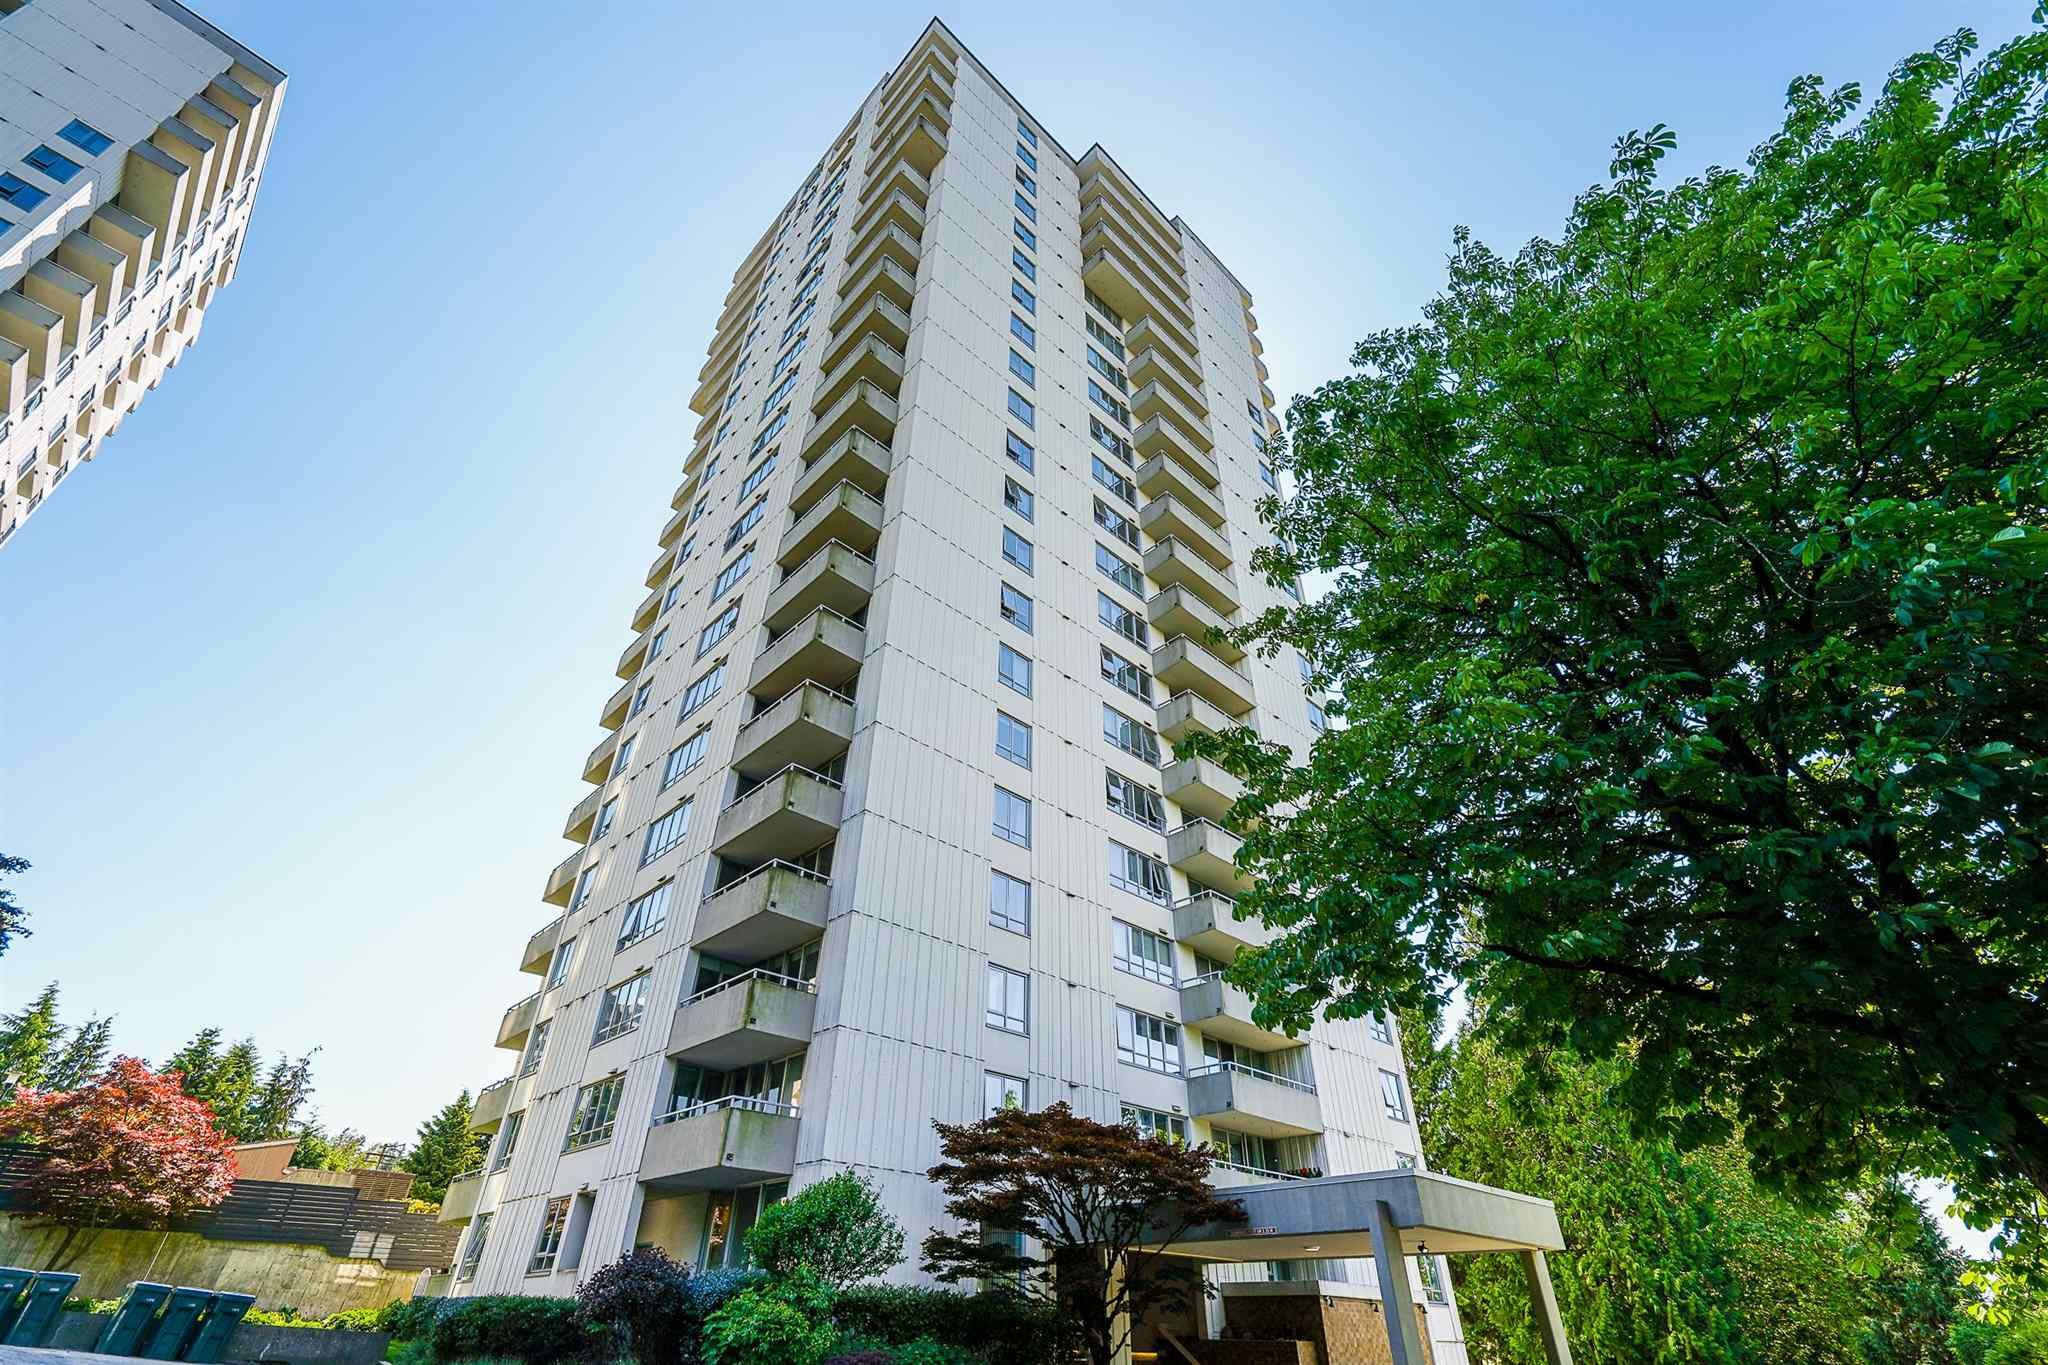 Main Photo: 1104 4160 SARDIS Street in Burnaby: Central Park BS Condo for sale (Burnaby South)  : MLS®# R2594358